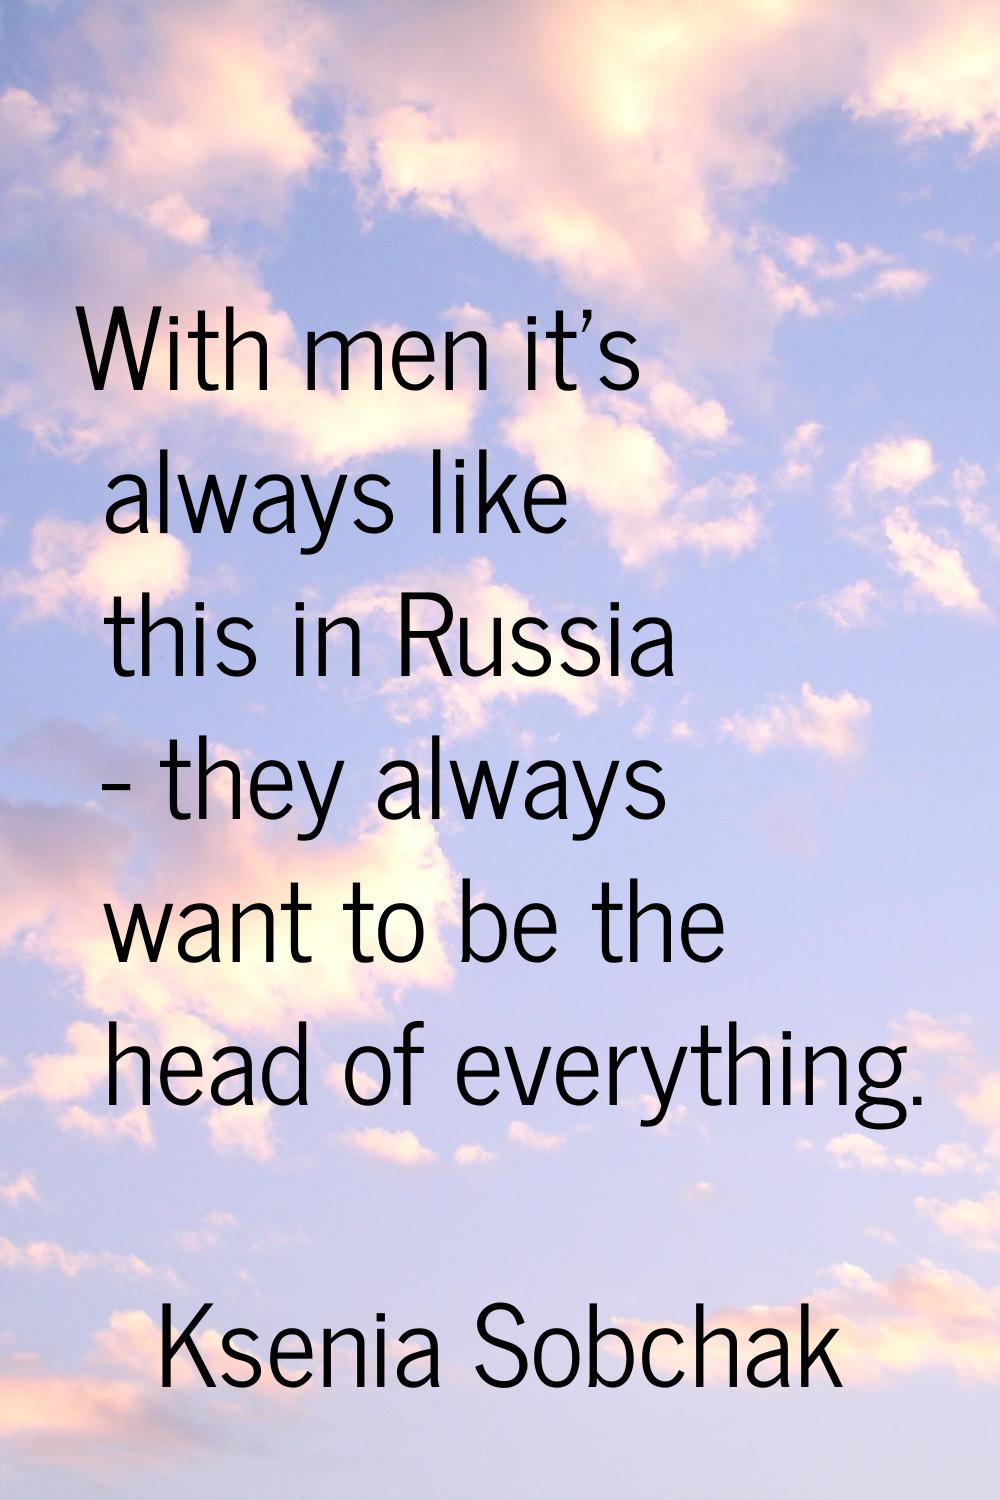 With men it's always like this in Russia - they always want to be the head of everything.